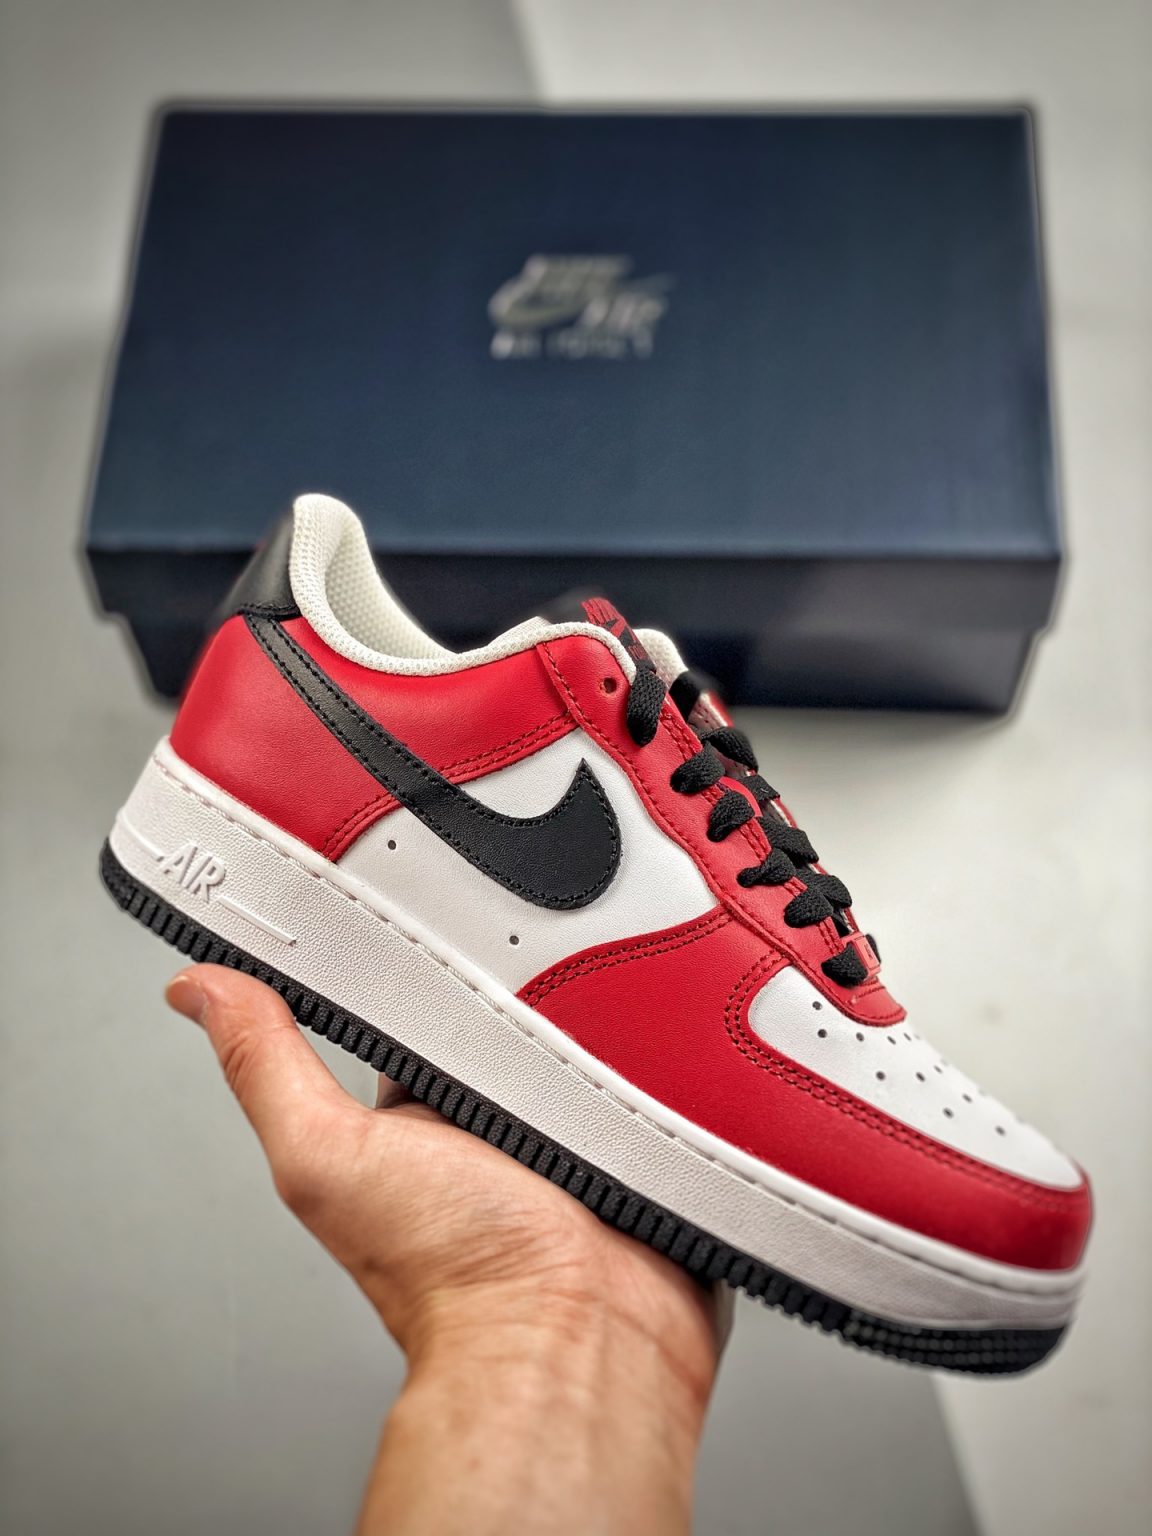 Nike Air Force 1 Low White/Team Red-Black FD0300-600 For Sale – Sneaker ...